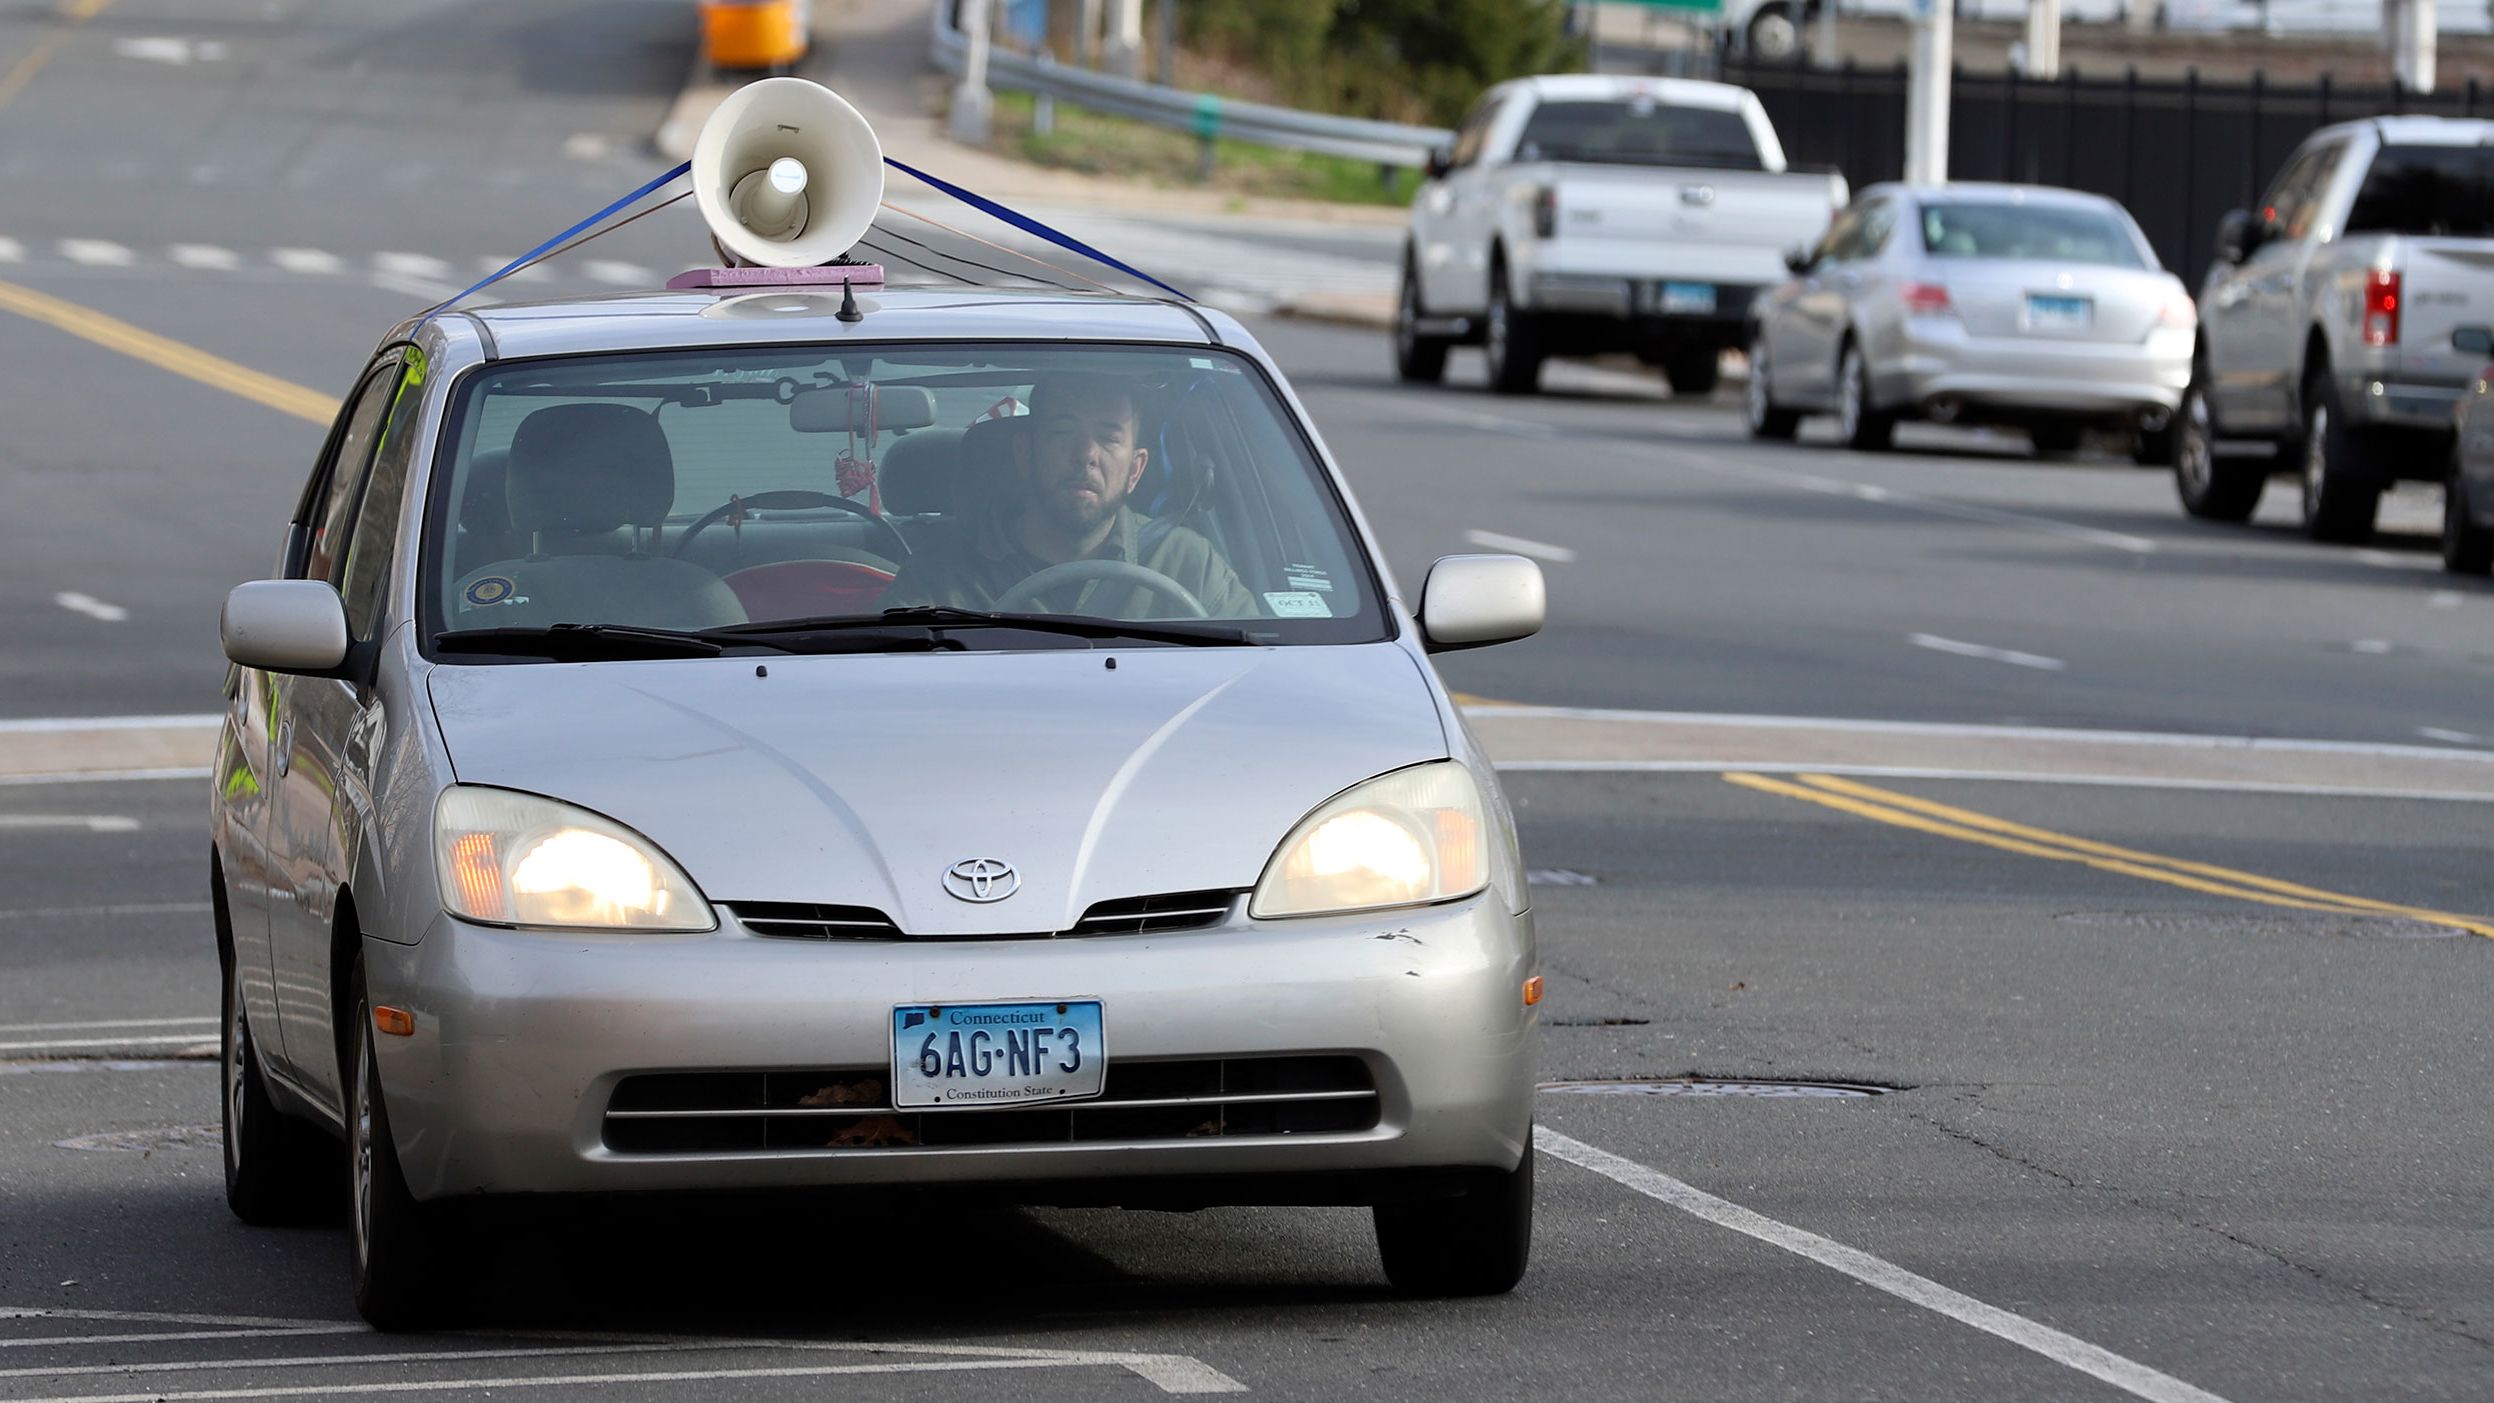 A person drives a car with a megaphone attached to the roof to protest Immigration and Customs Enforcement in Hartford, Connecticut, on April 2.